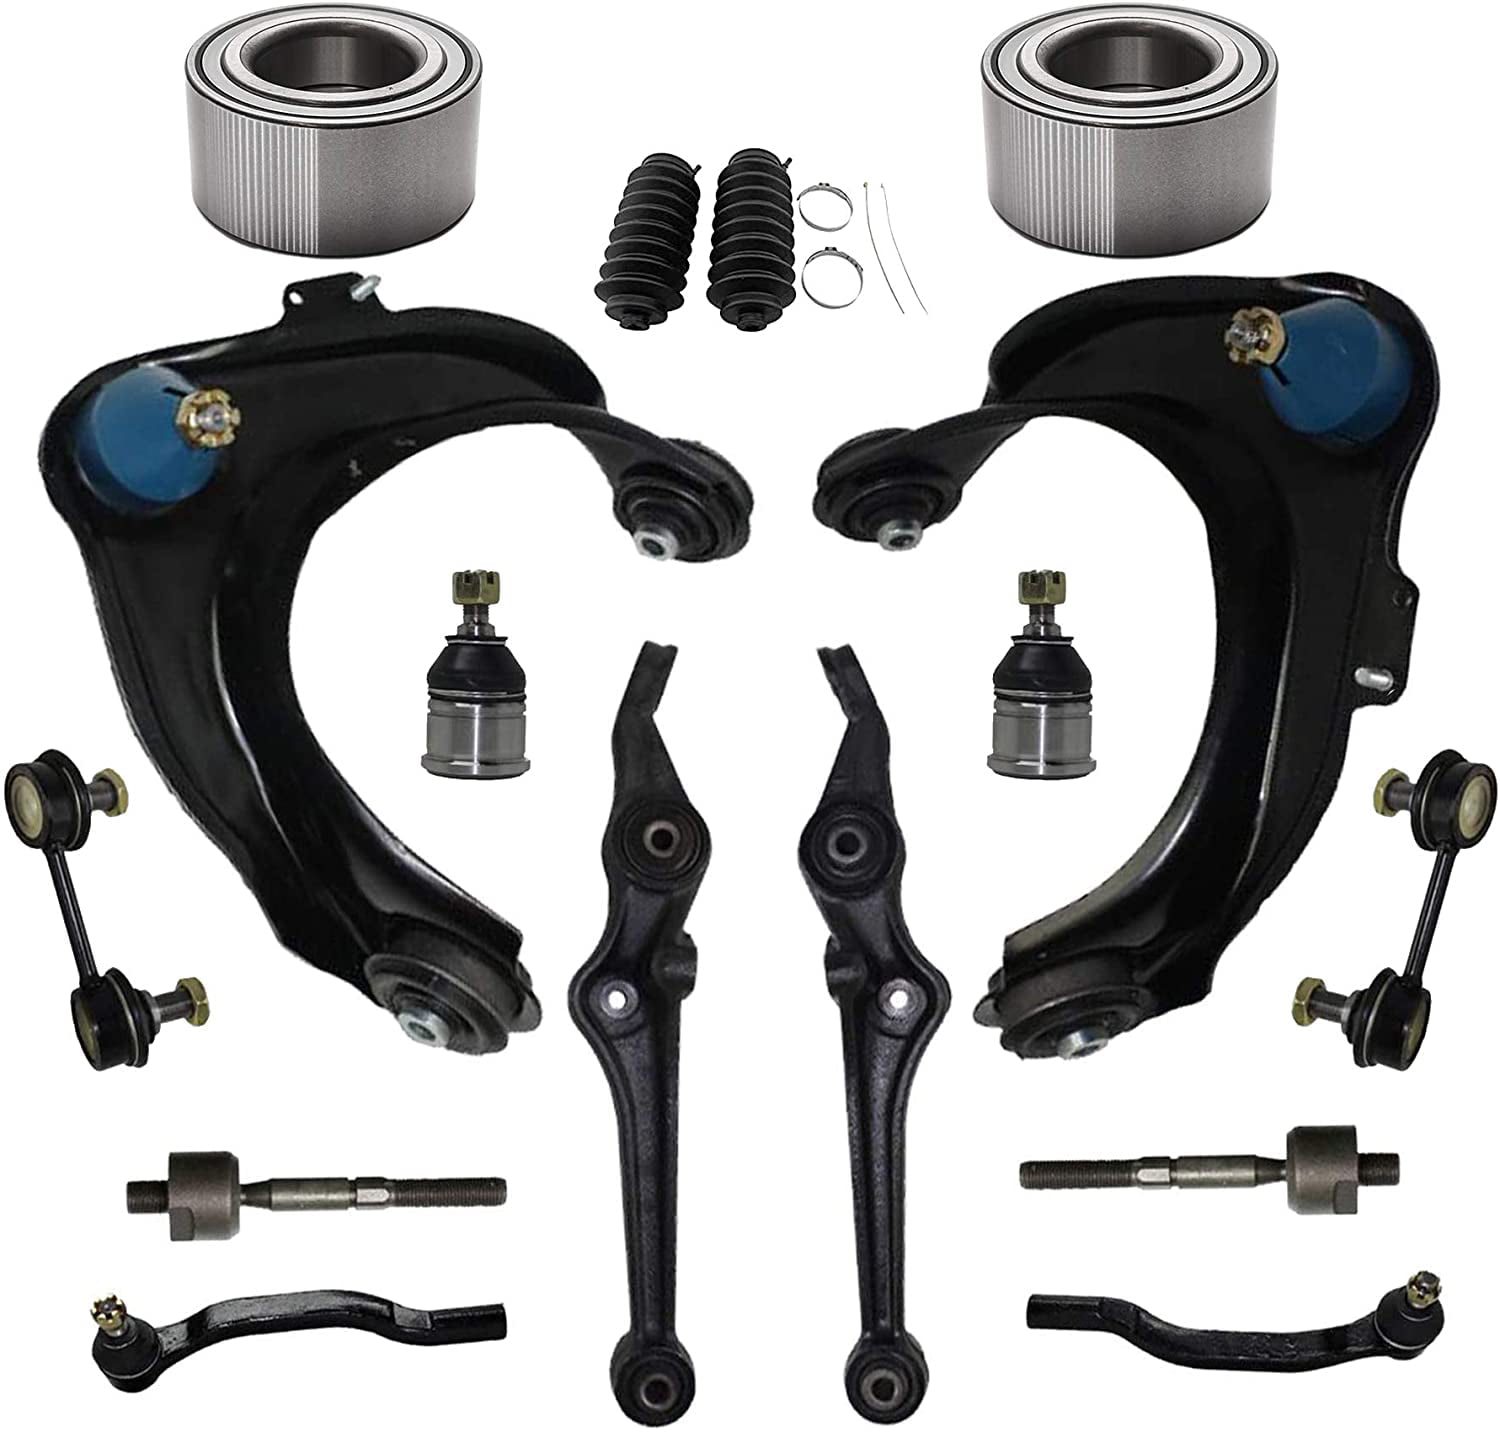 10-Year Warranty for 2001-2003 Acura CL - Front Upper Driver & Passenger Side Control Arm and Ball Joint Assembly 2 - 1998-2002 Honda Accord 1999-2003 Acura TL Detroit Axle Both 